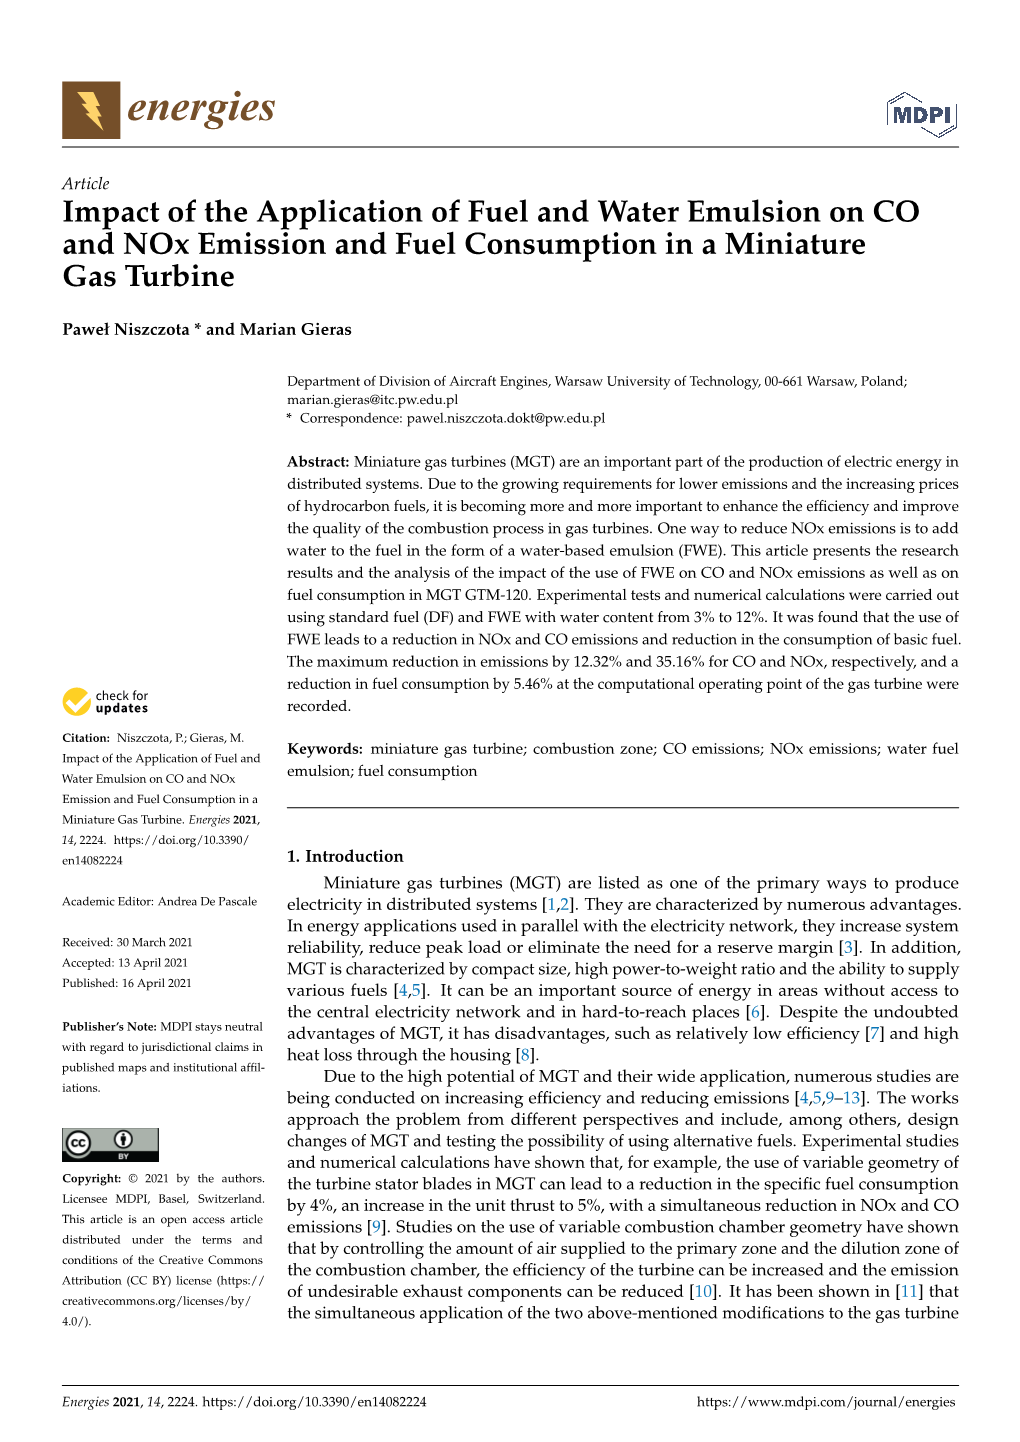 Impact of the Application of Fuel and Water Emulsion on CO and Nox Emission and Fuel Consumption in a Miniature Gas Turbine